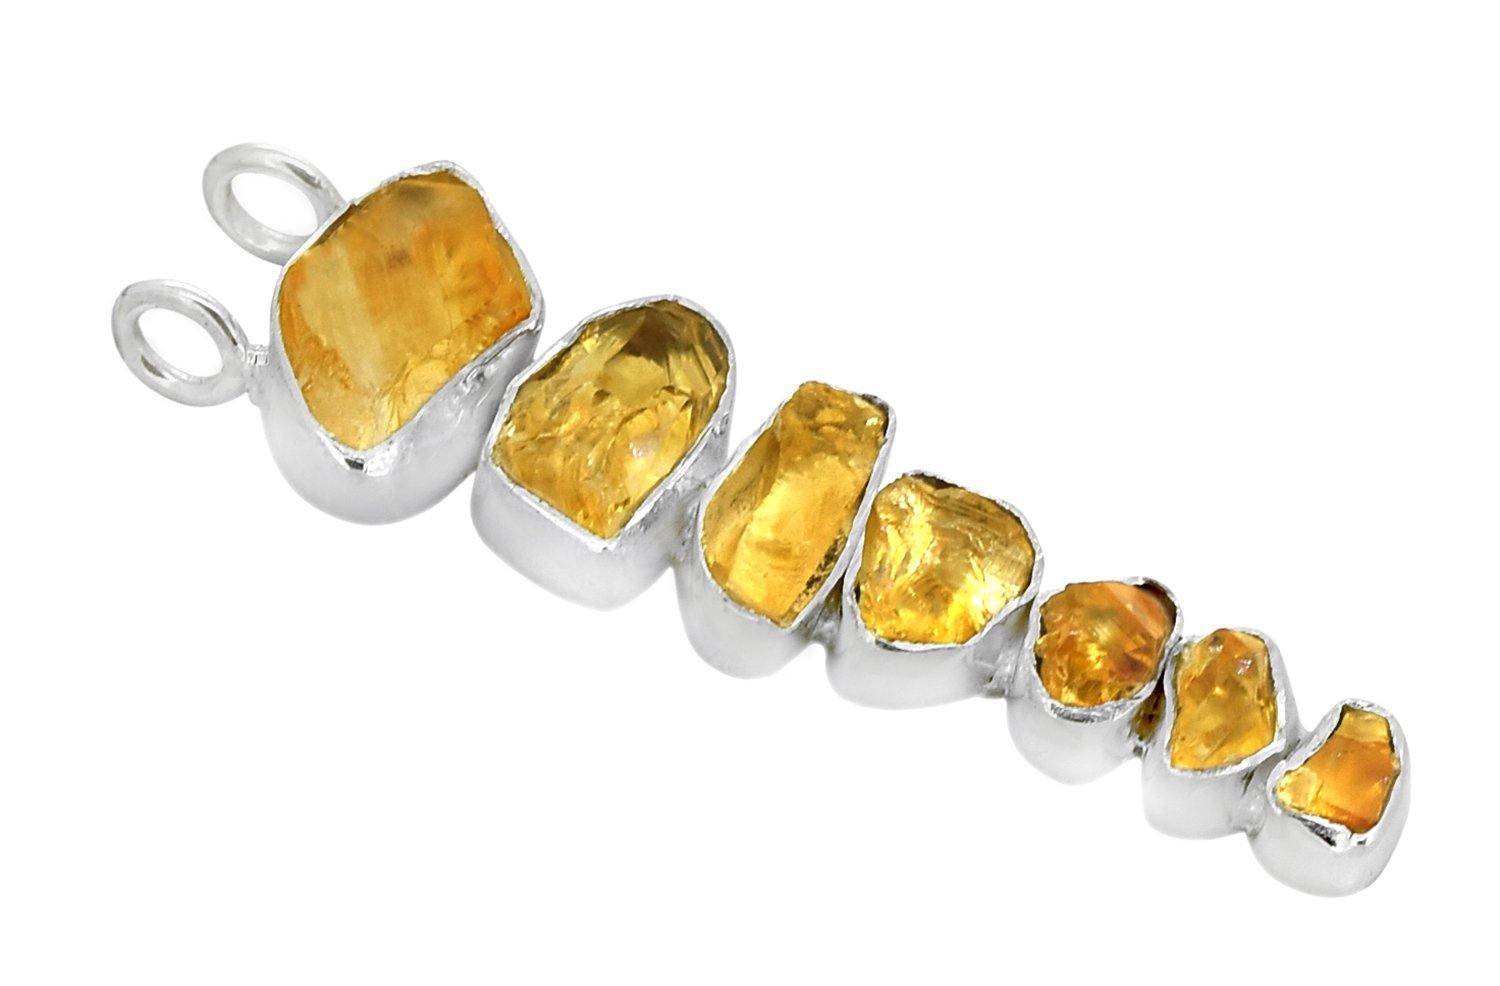 Rough Citrine Solid 925 Sterling Silver Pendant with 18 Inch Chain Necklace Jewelry - YoTreasure